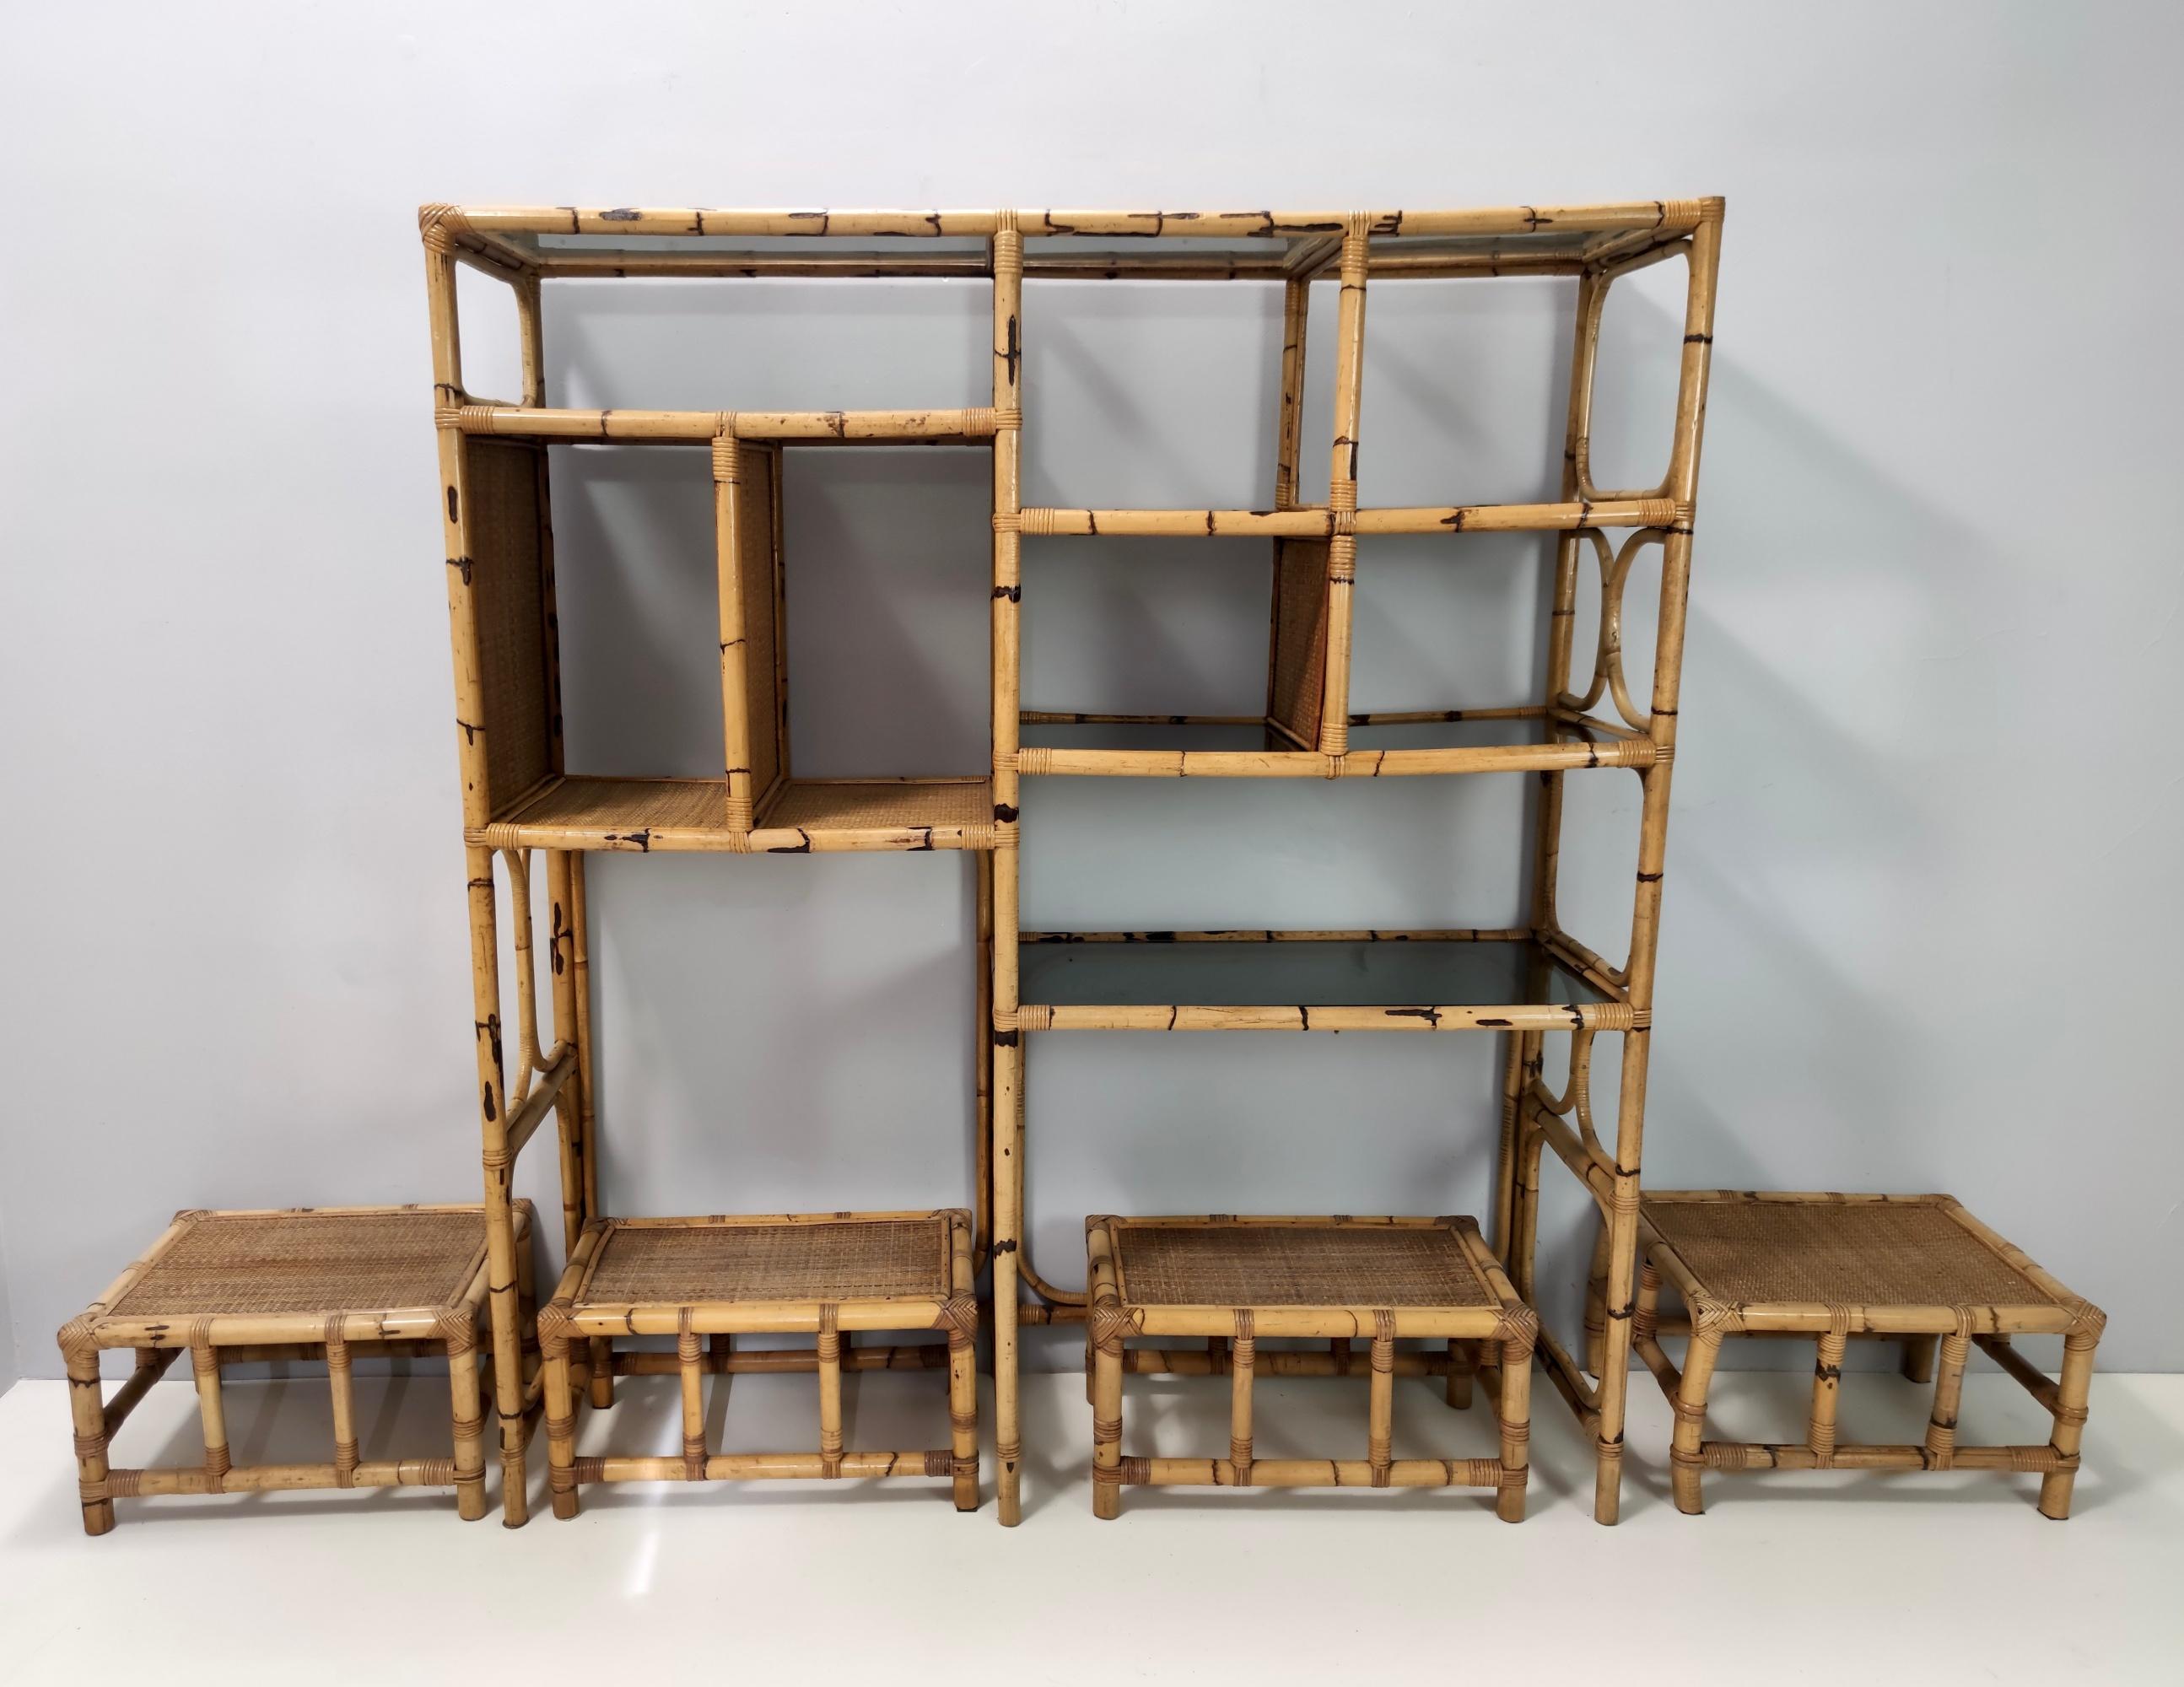 Made in Italy by Vivai del Sud, 1970s. 
The bookcase features a bamboo frame and smoked glass shelves.
This set includes 4 bamboo and wicker stools. 
They might show slight traces of use since they'revintage, but they can be considered as in very